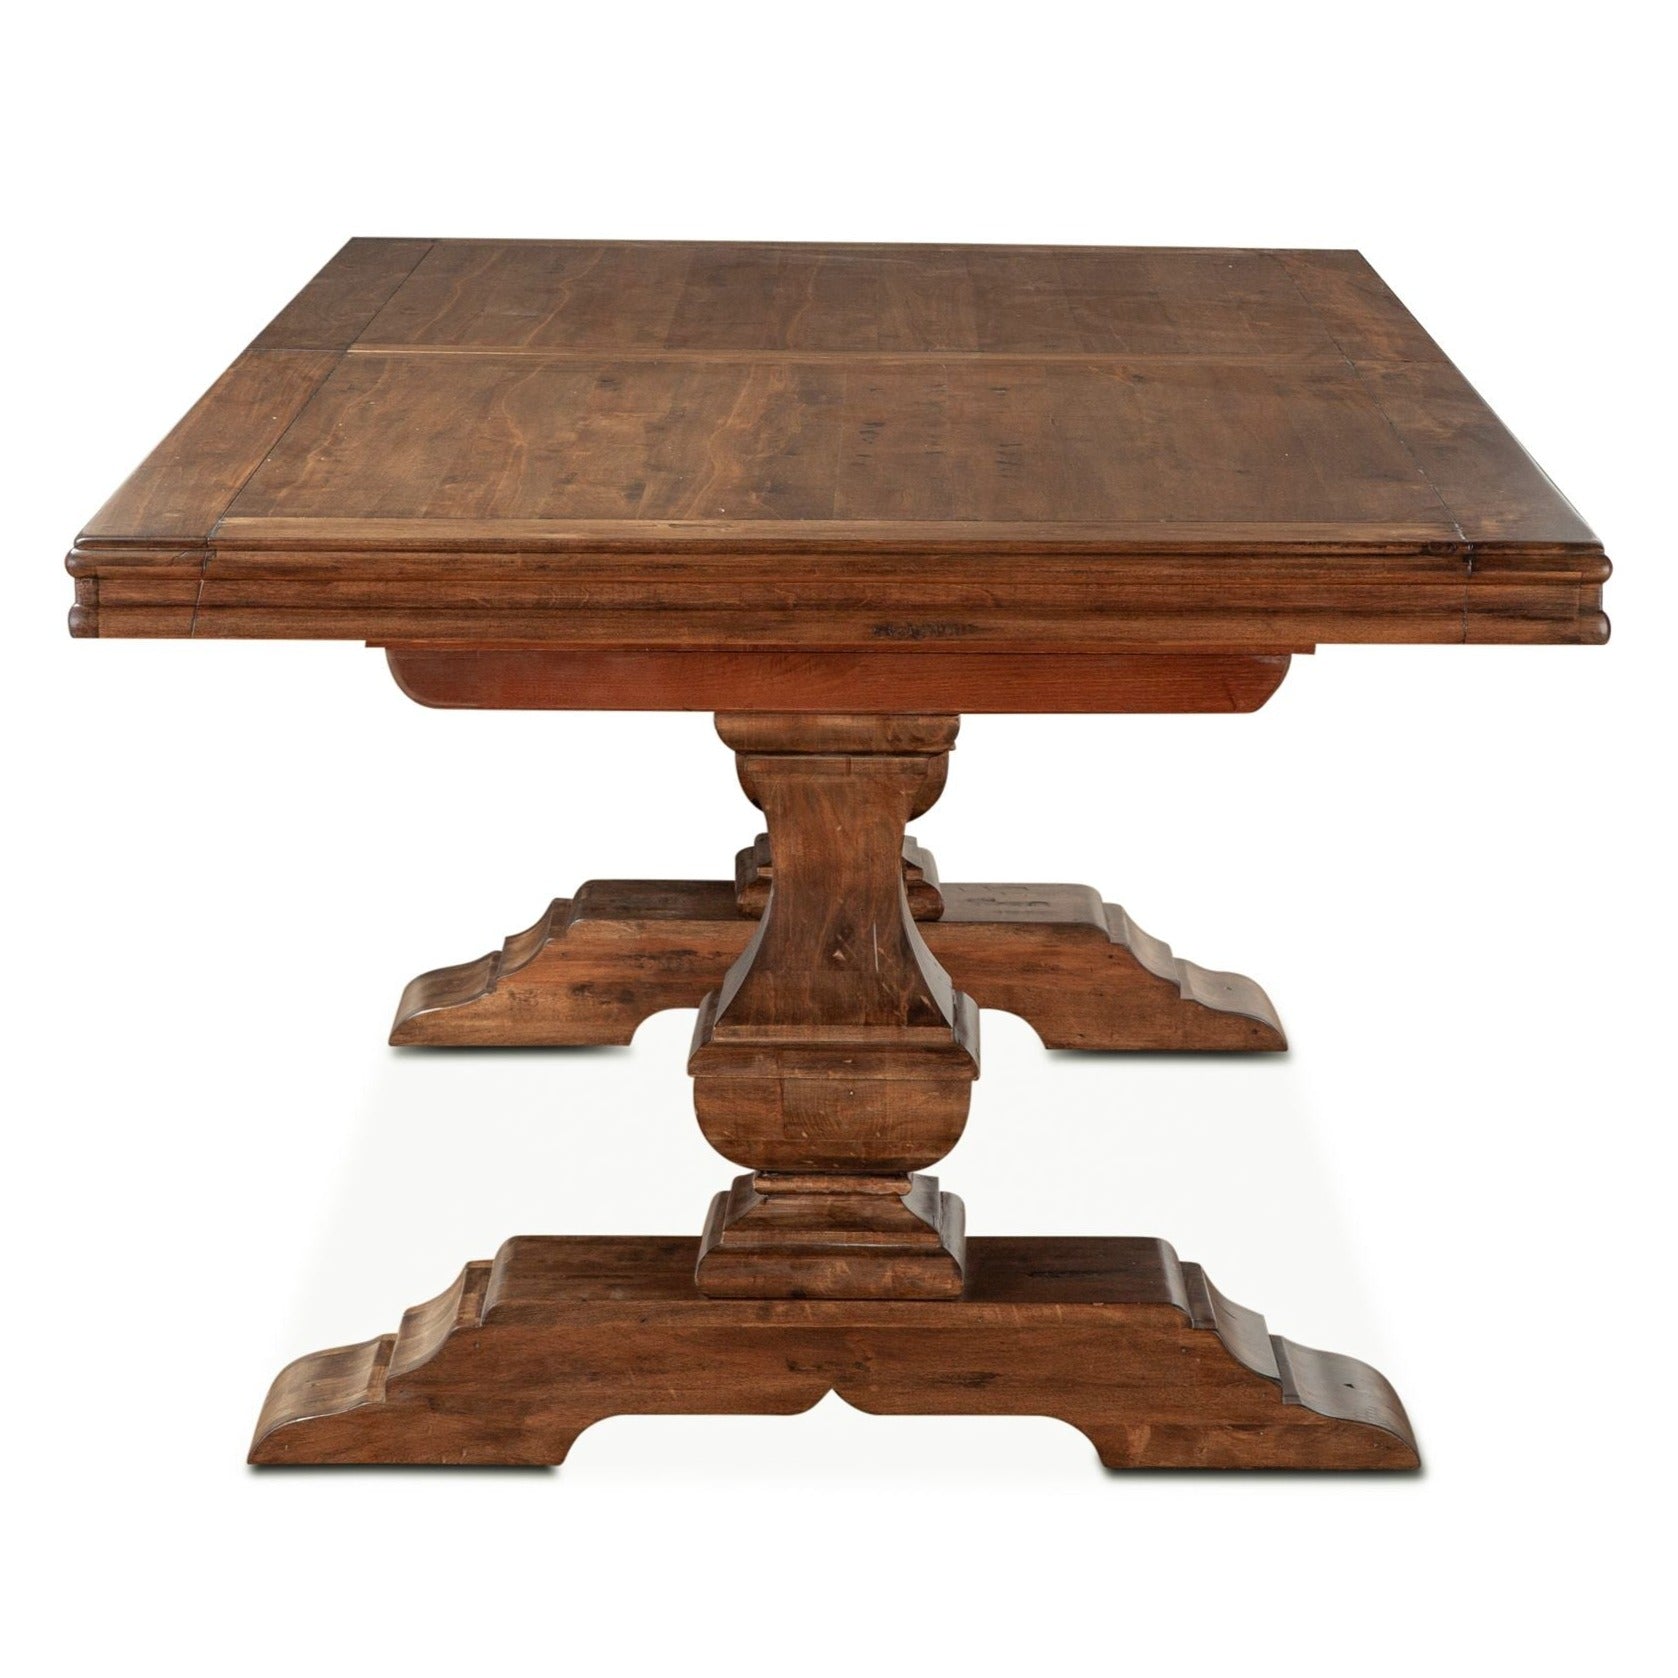 Classic French Country Extension Dining Table